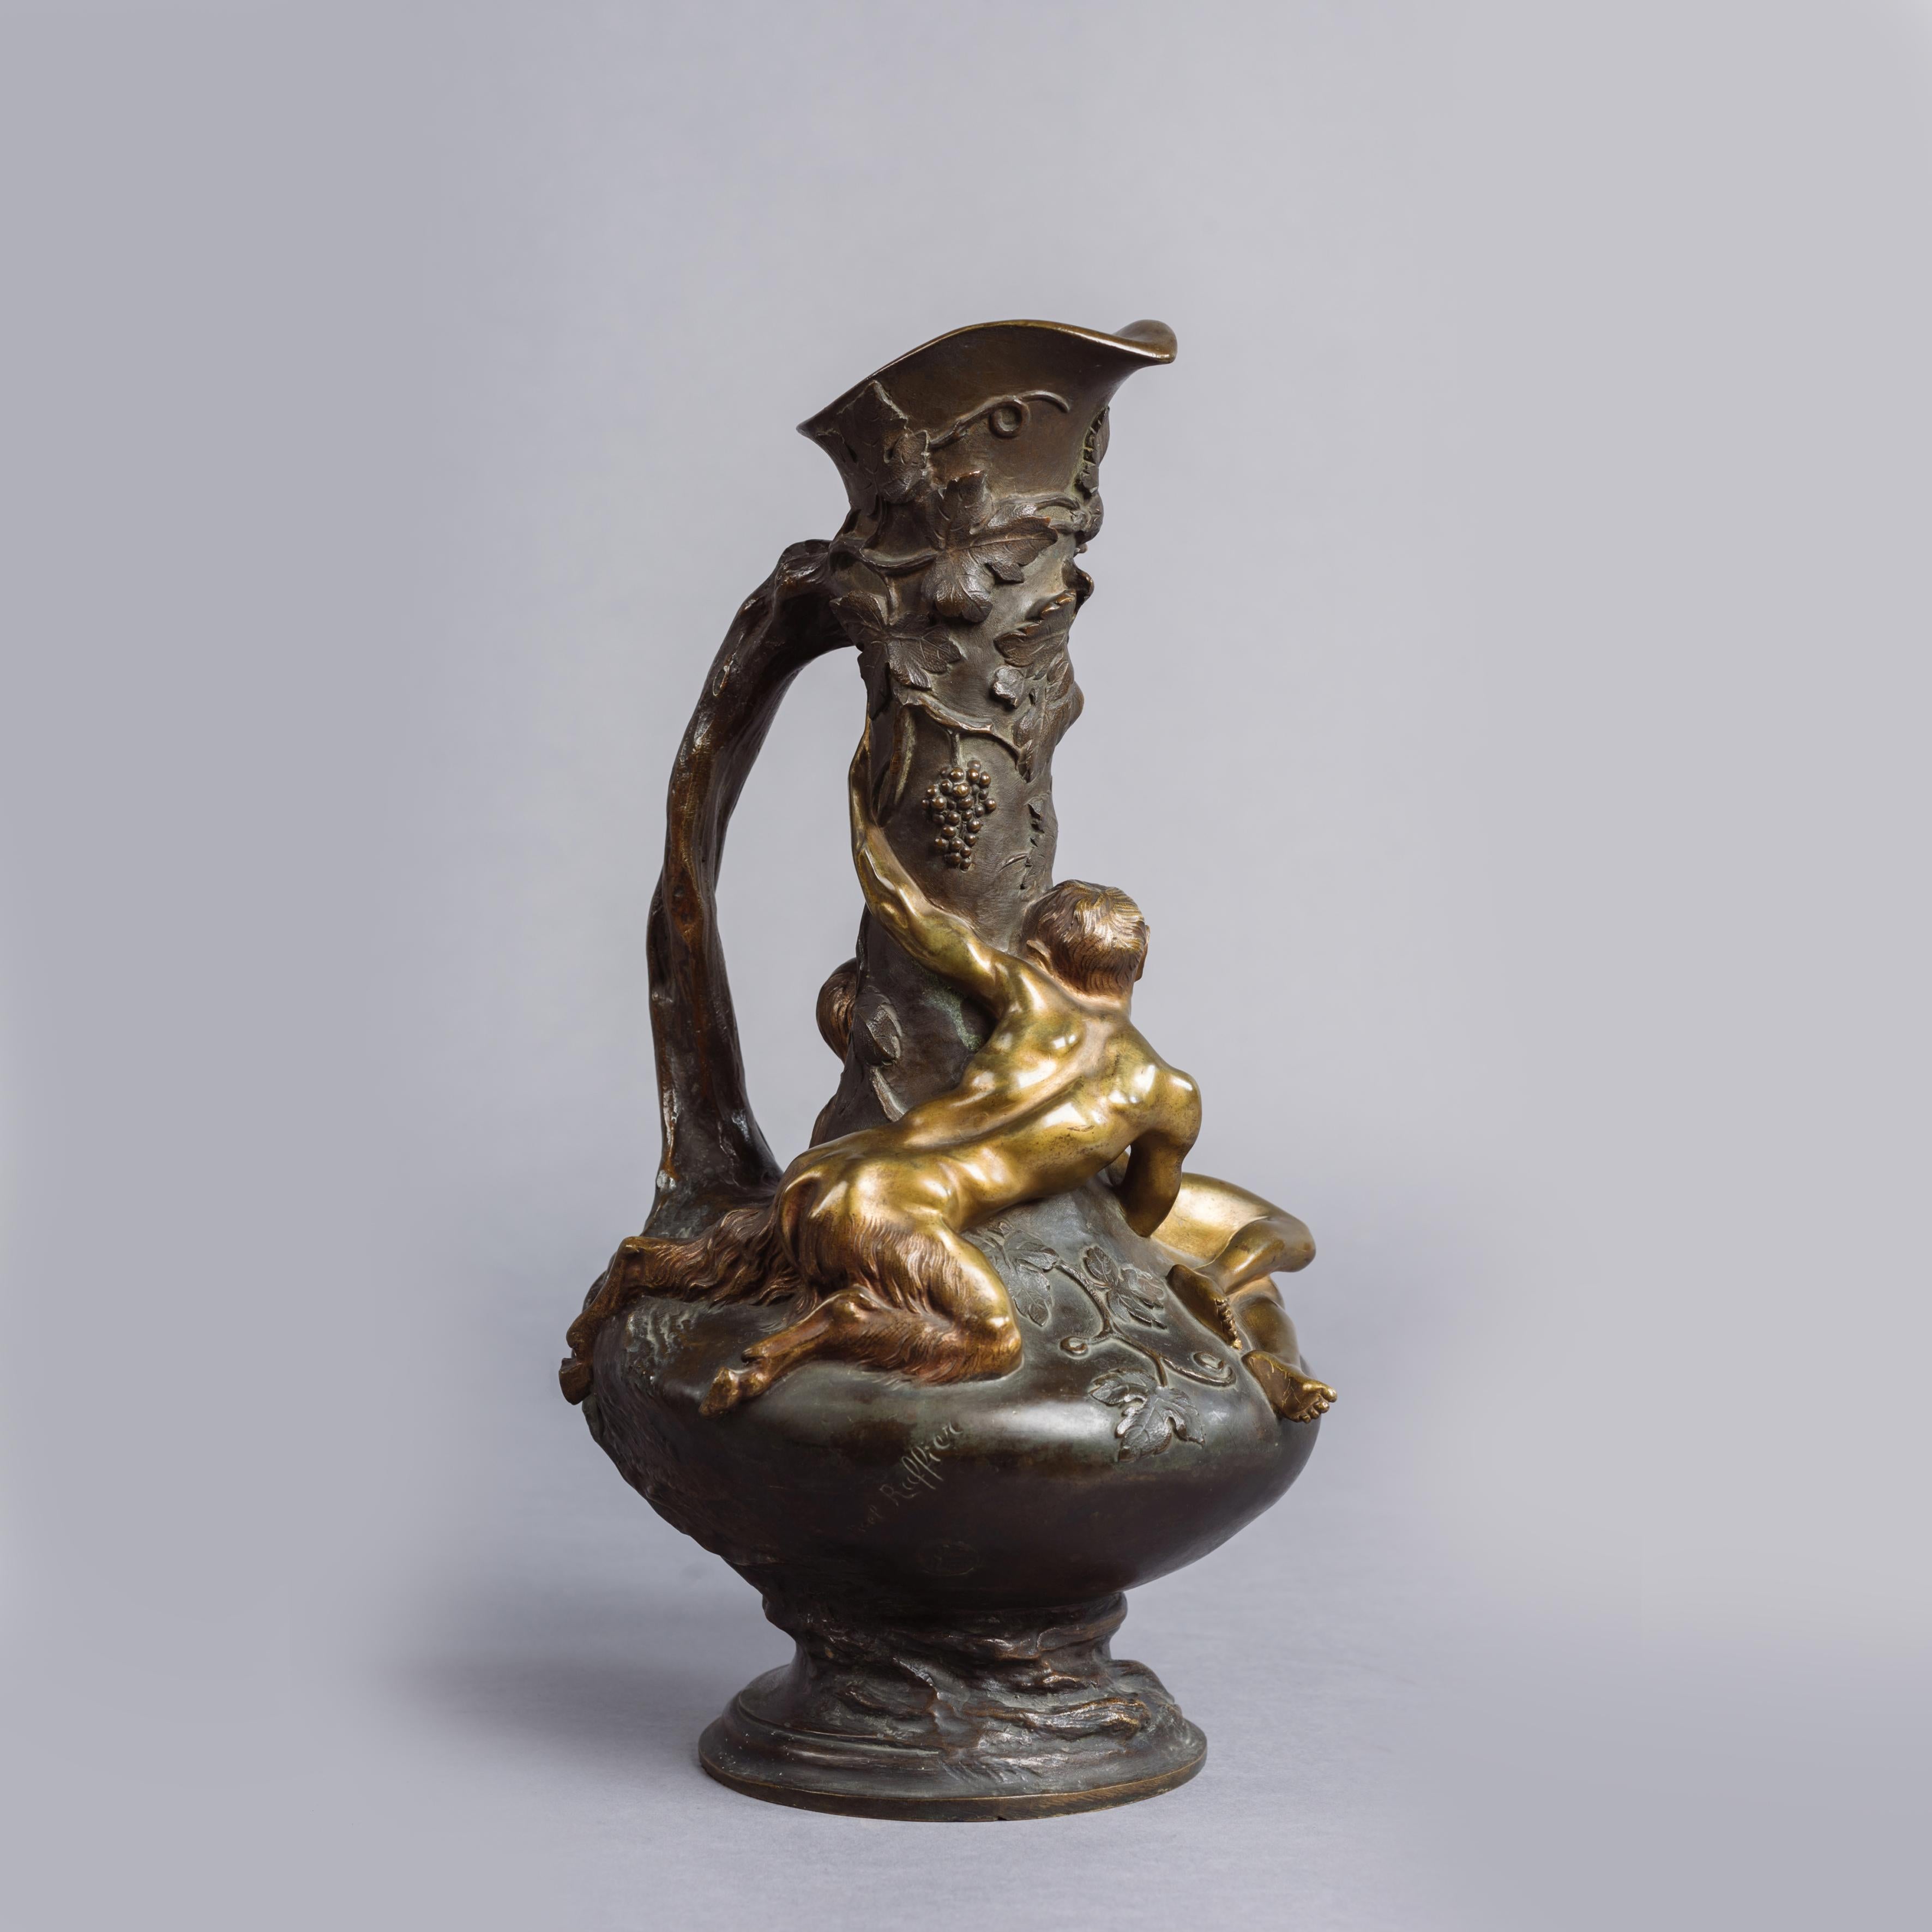 A fine patinated bronze ewer depicting a Satyr and Naïade by Noël Ruffier.

Signed to the bronze 'Noel Ruffier'. 

Finely cast in high relief with a classical female Naiade and a Satyr figure amongst grape vines, the handle of the vase in the